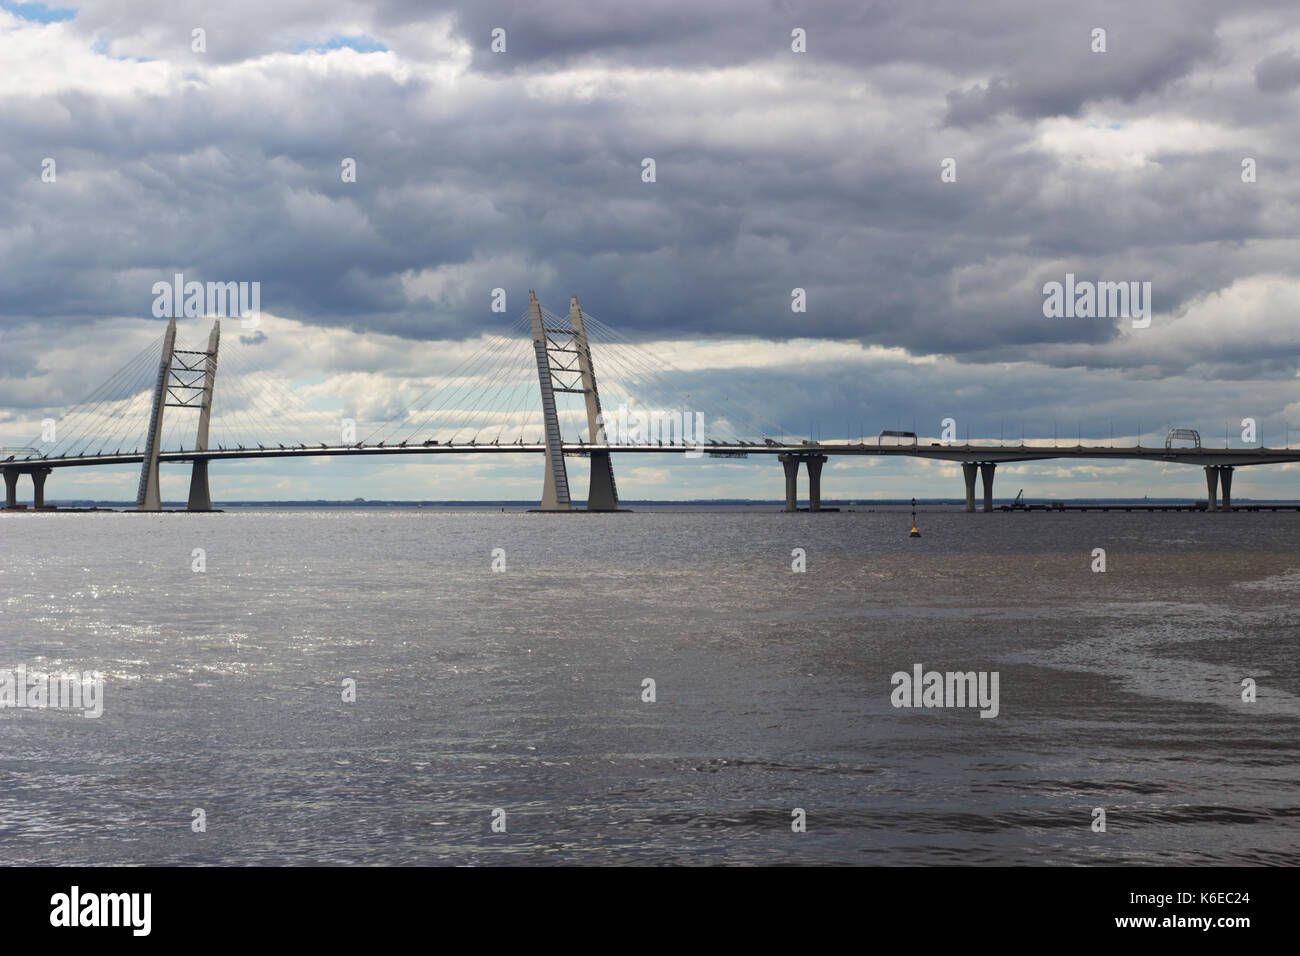 Cable-stayed bridge over the ship's fairway Stock Photo